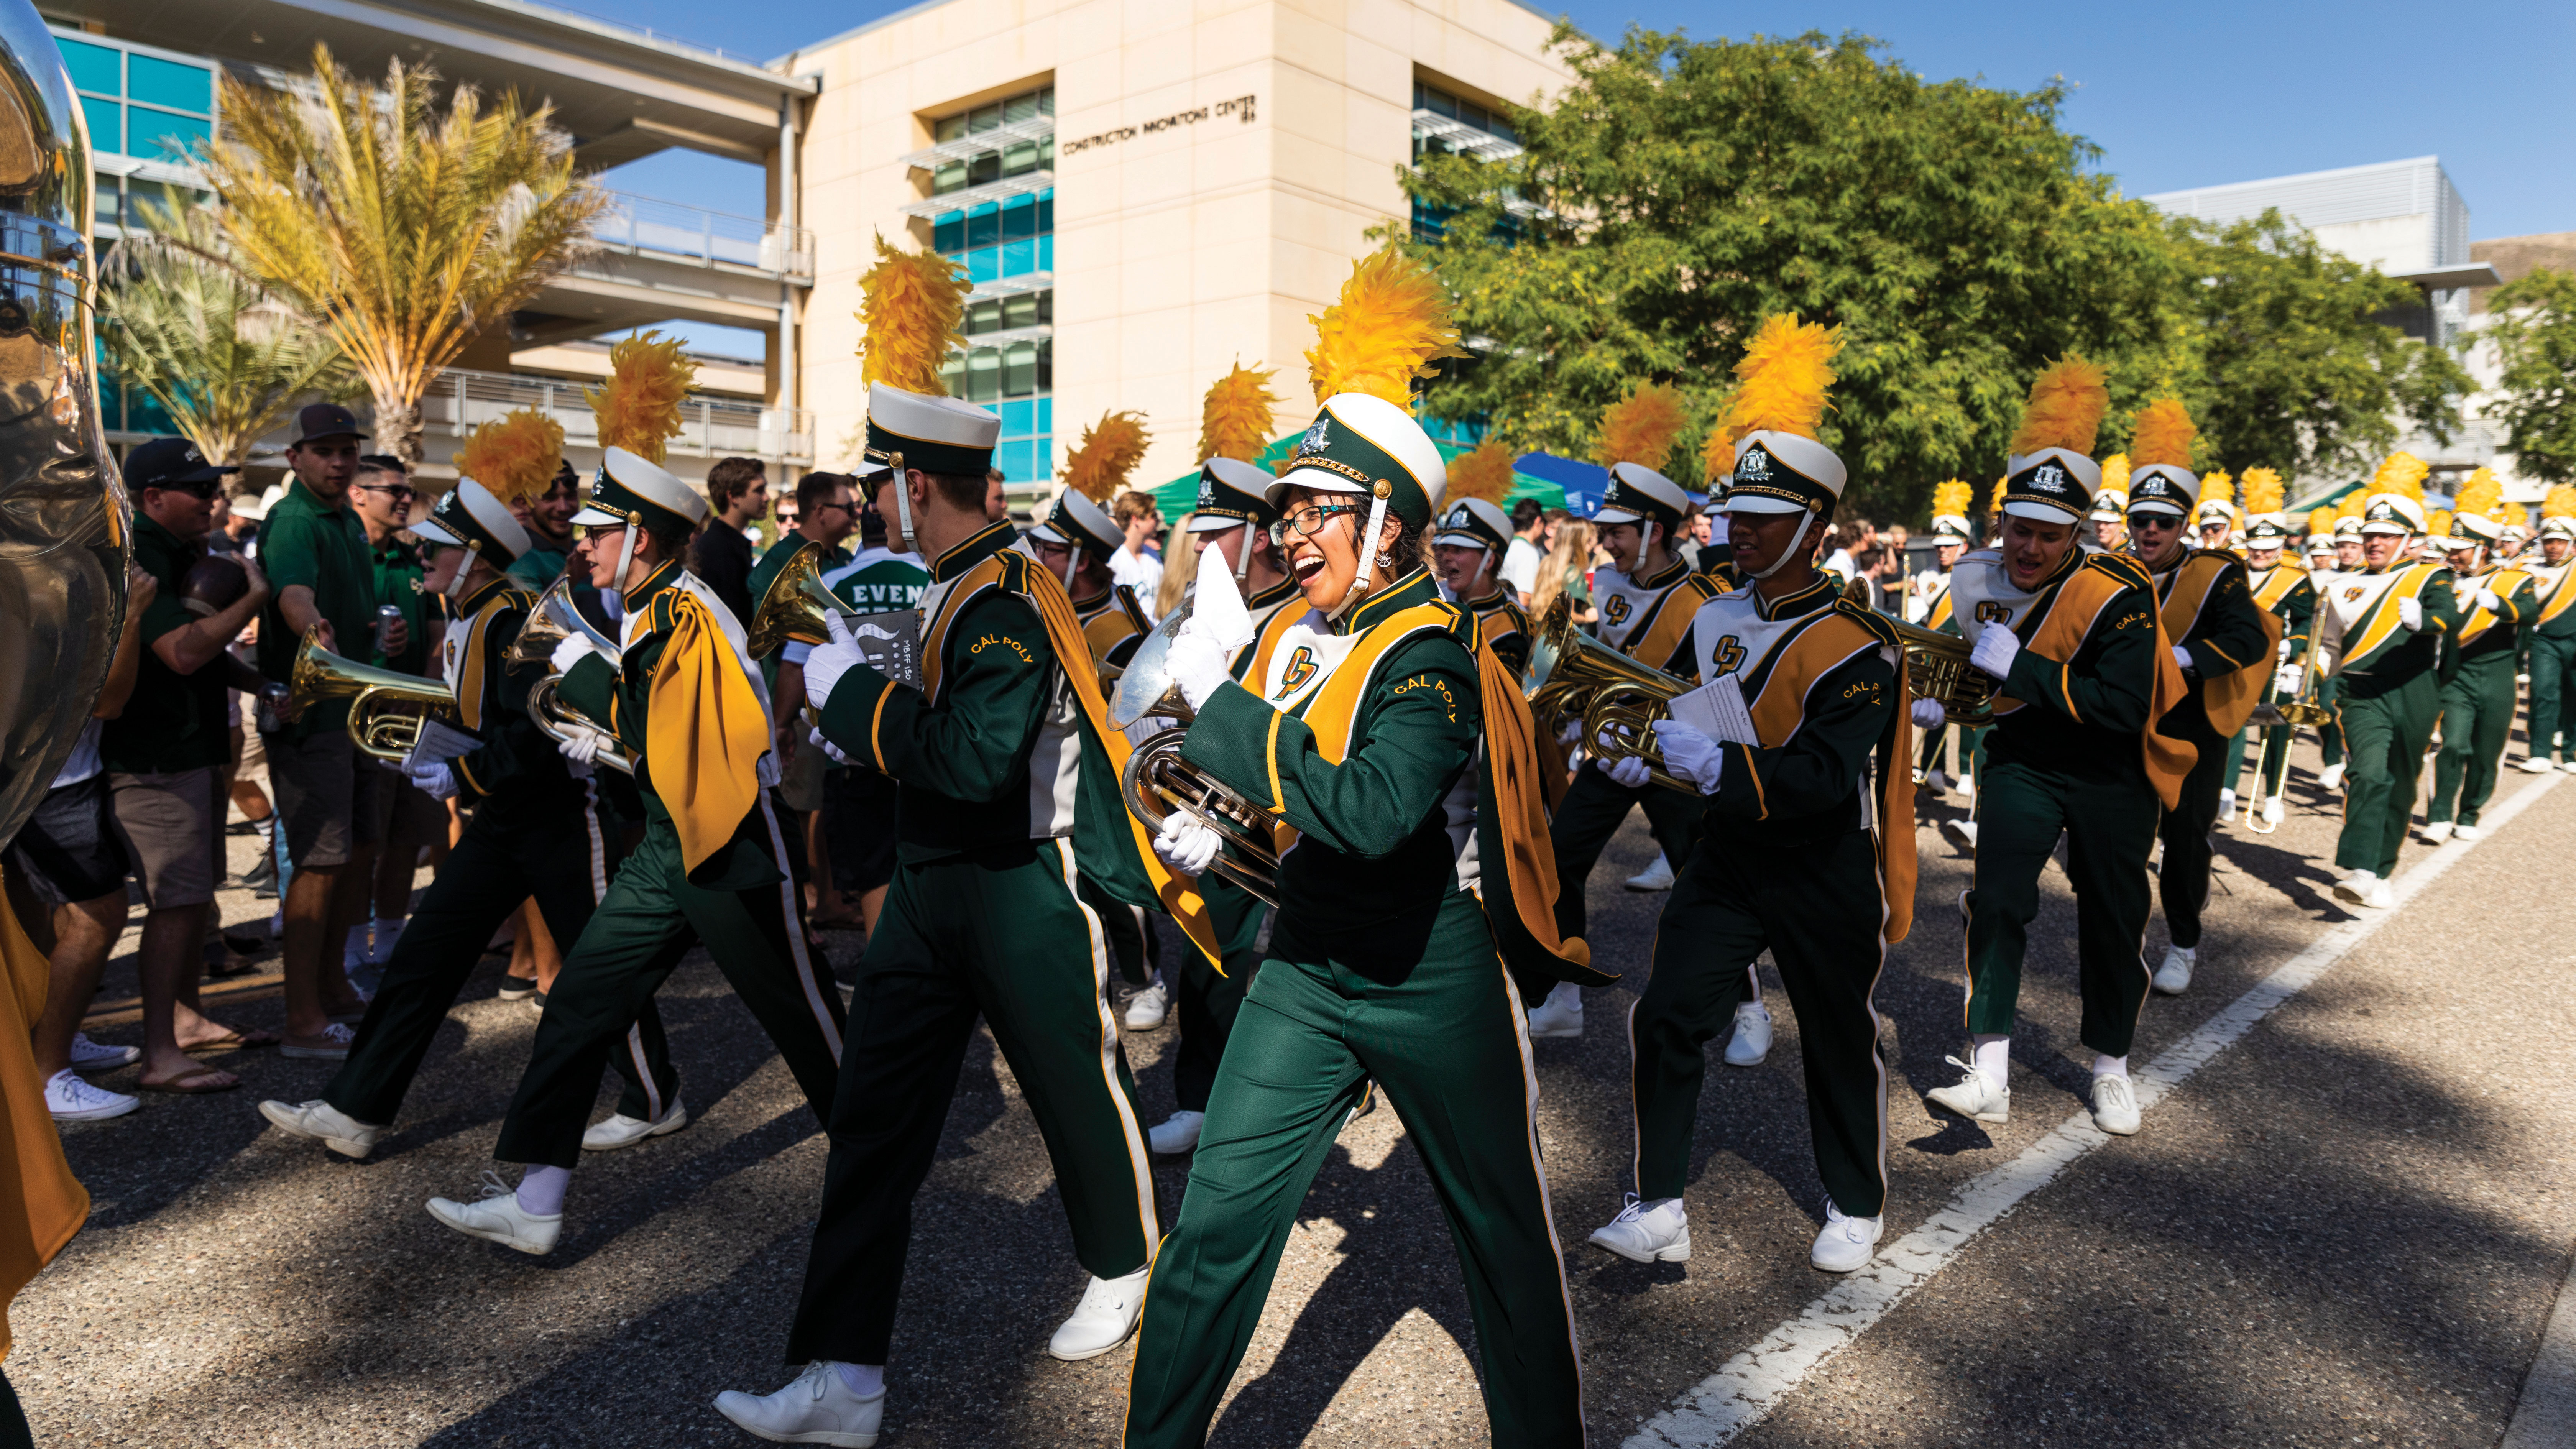 Musicians march while smiling and holding their instruments on Cal Poly's campus.